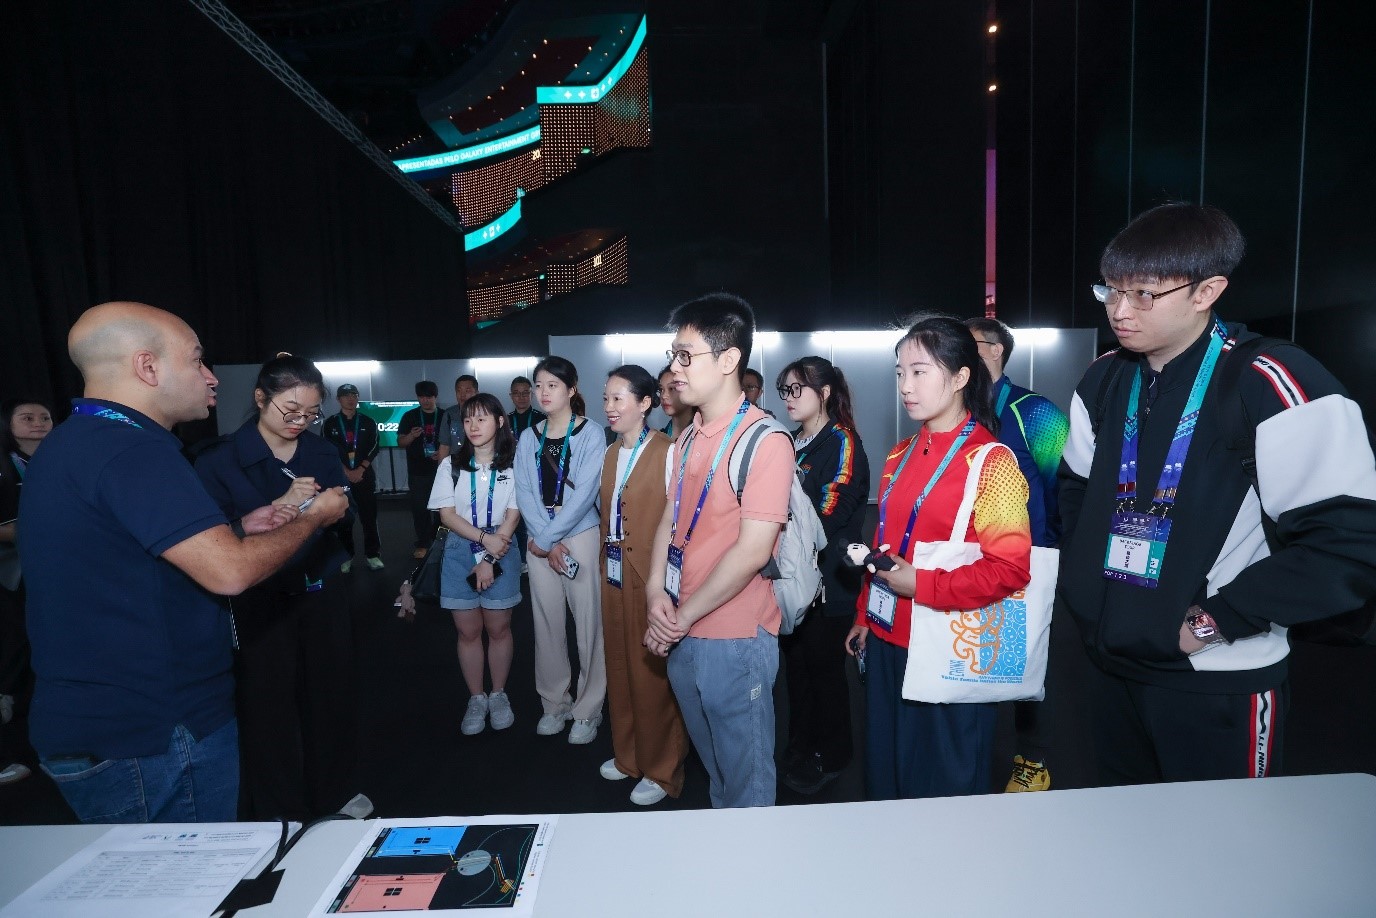 GEG invited students from the Macao University of Tourism to join the “Backstage Tour” activity, in which the students paid attention to the staff's introduction to the settings and functions of various work areas behind the major sports event.